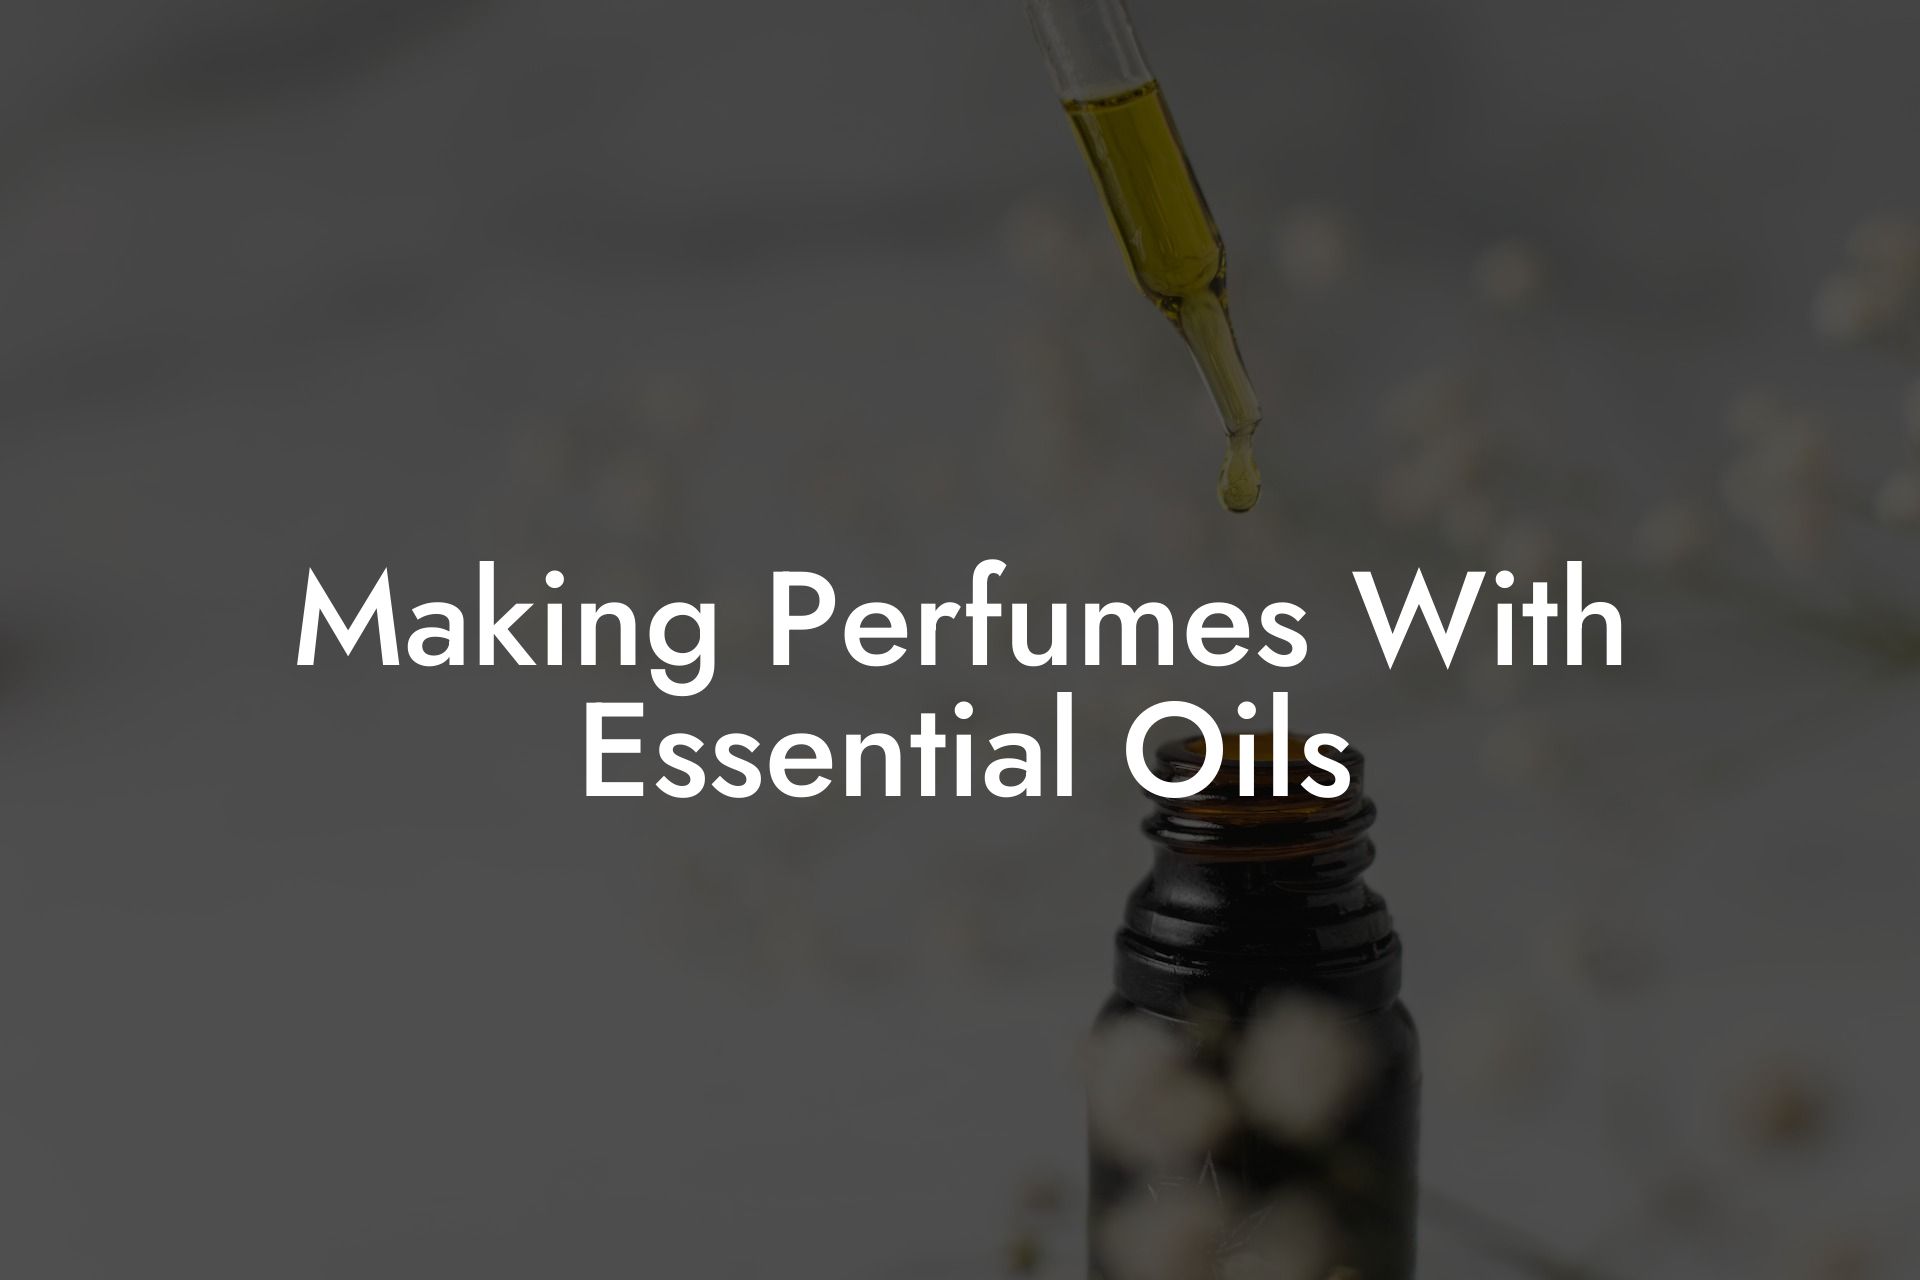 Making Perfumes With Essential Oils